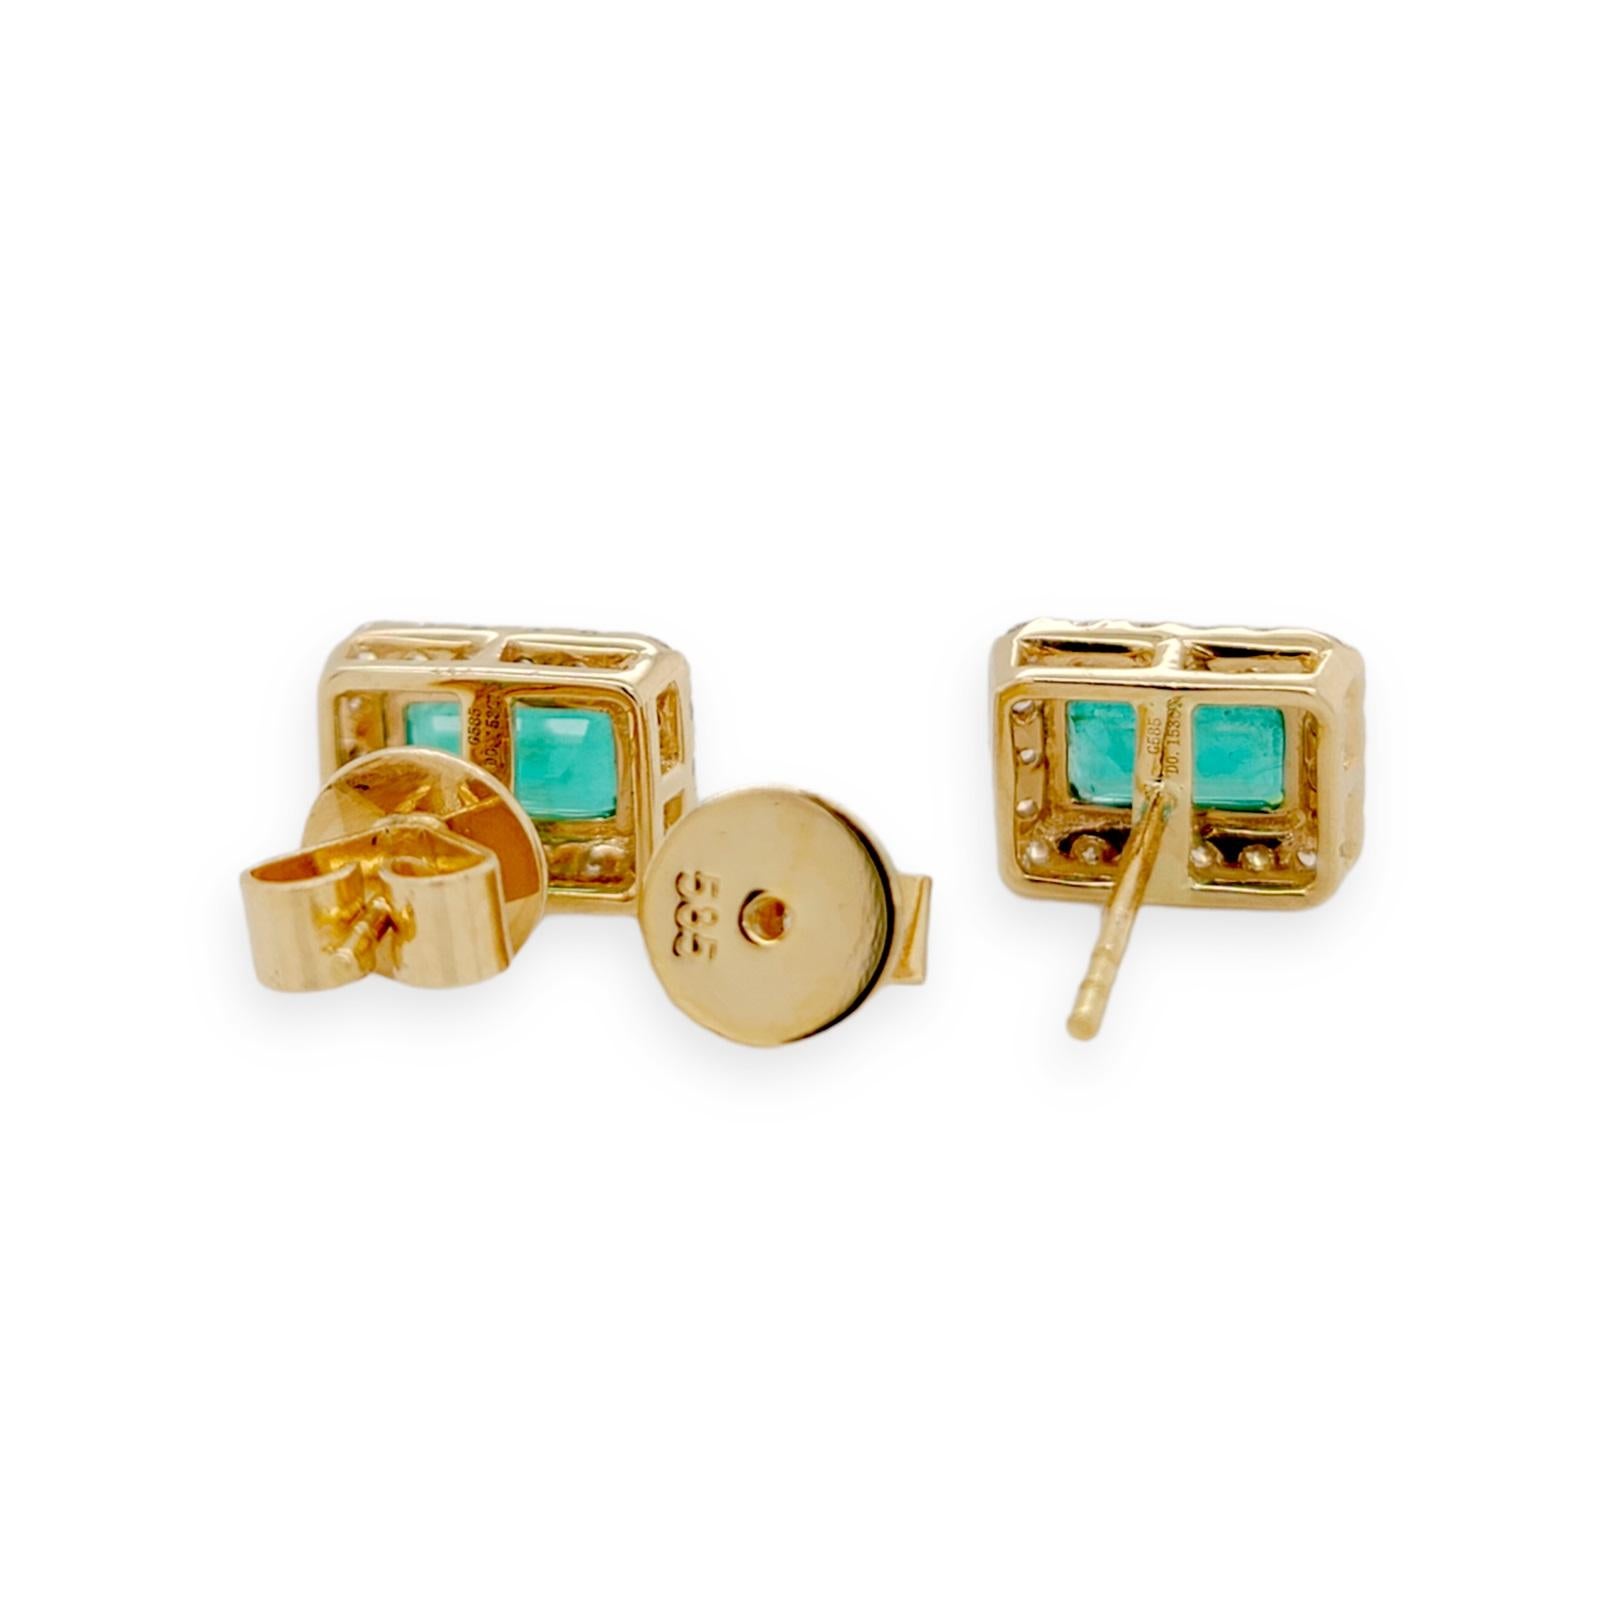 1.10 Ct Colombian Emerald & 0.30 Ct Diamonds in 14k Yellow Gold Stud Earrings For Sale 1